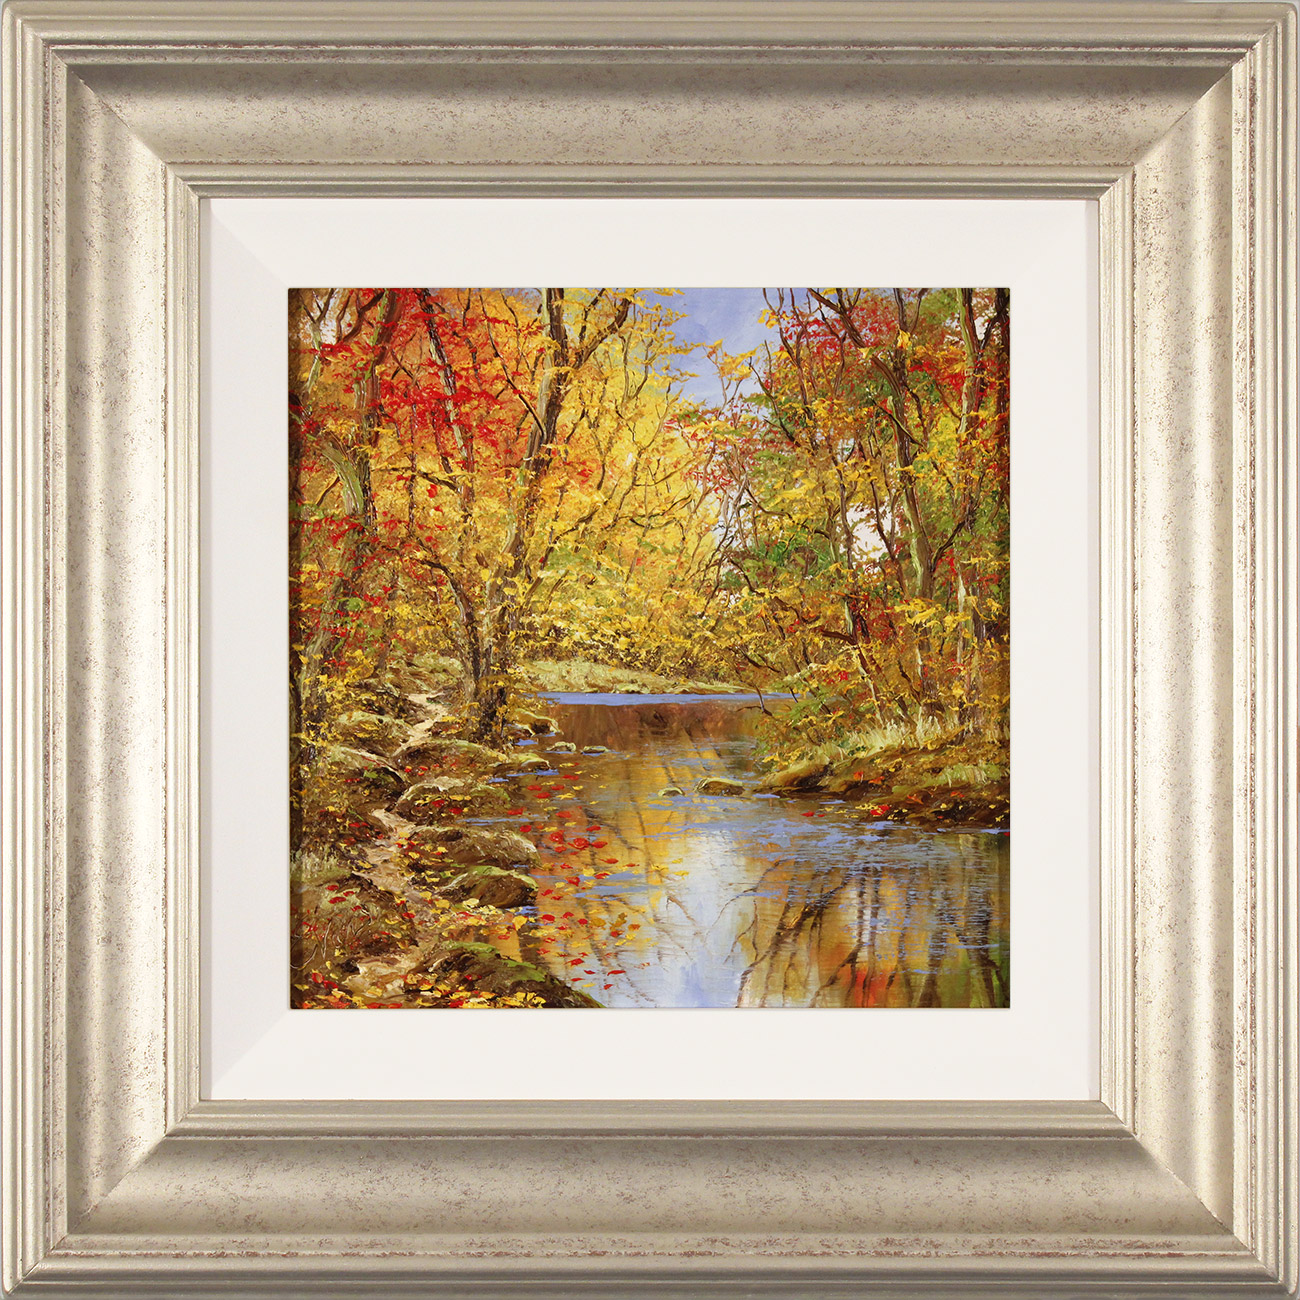 Terry Evans, Original oil painting on panel, Autumn Gold 